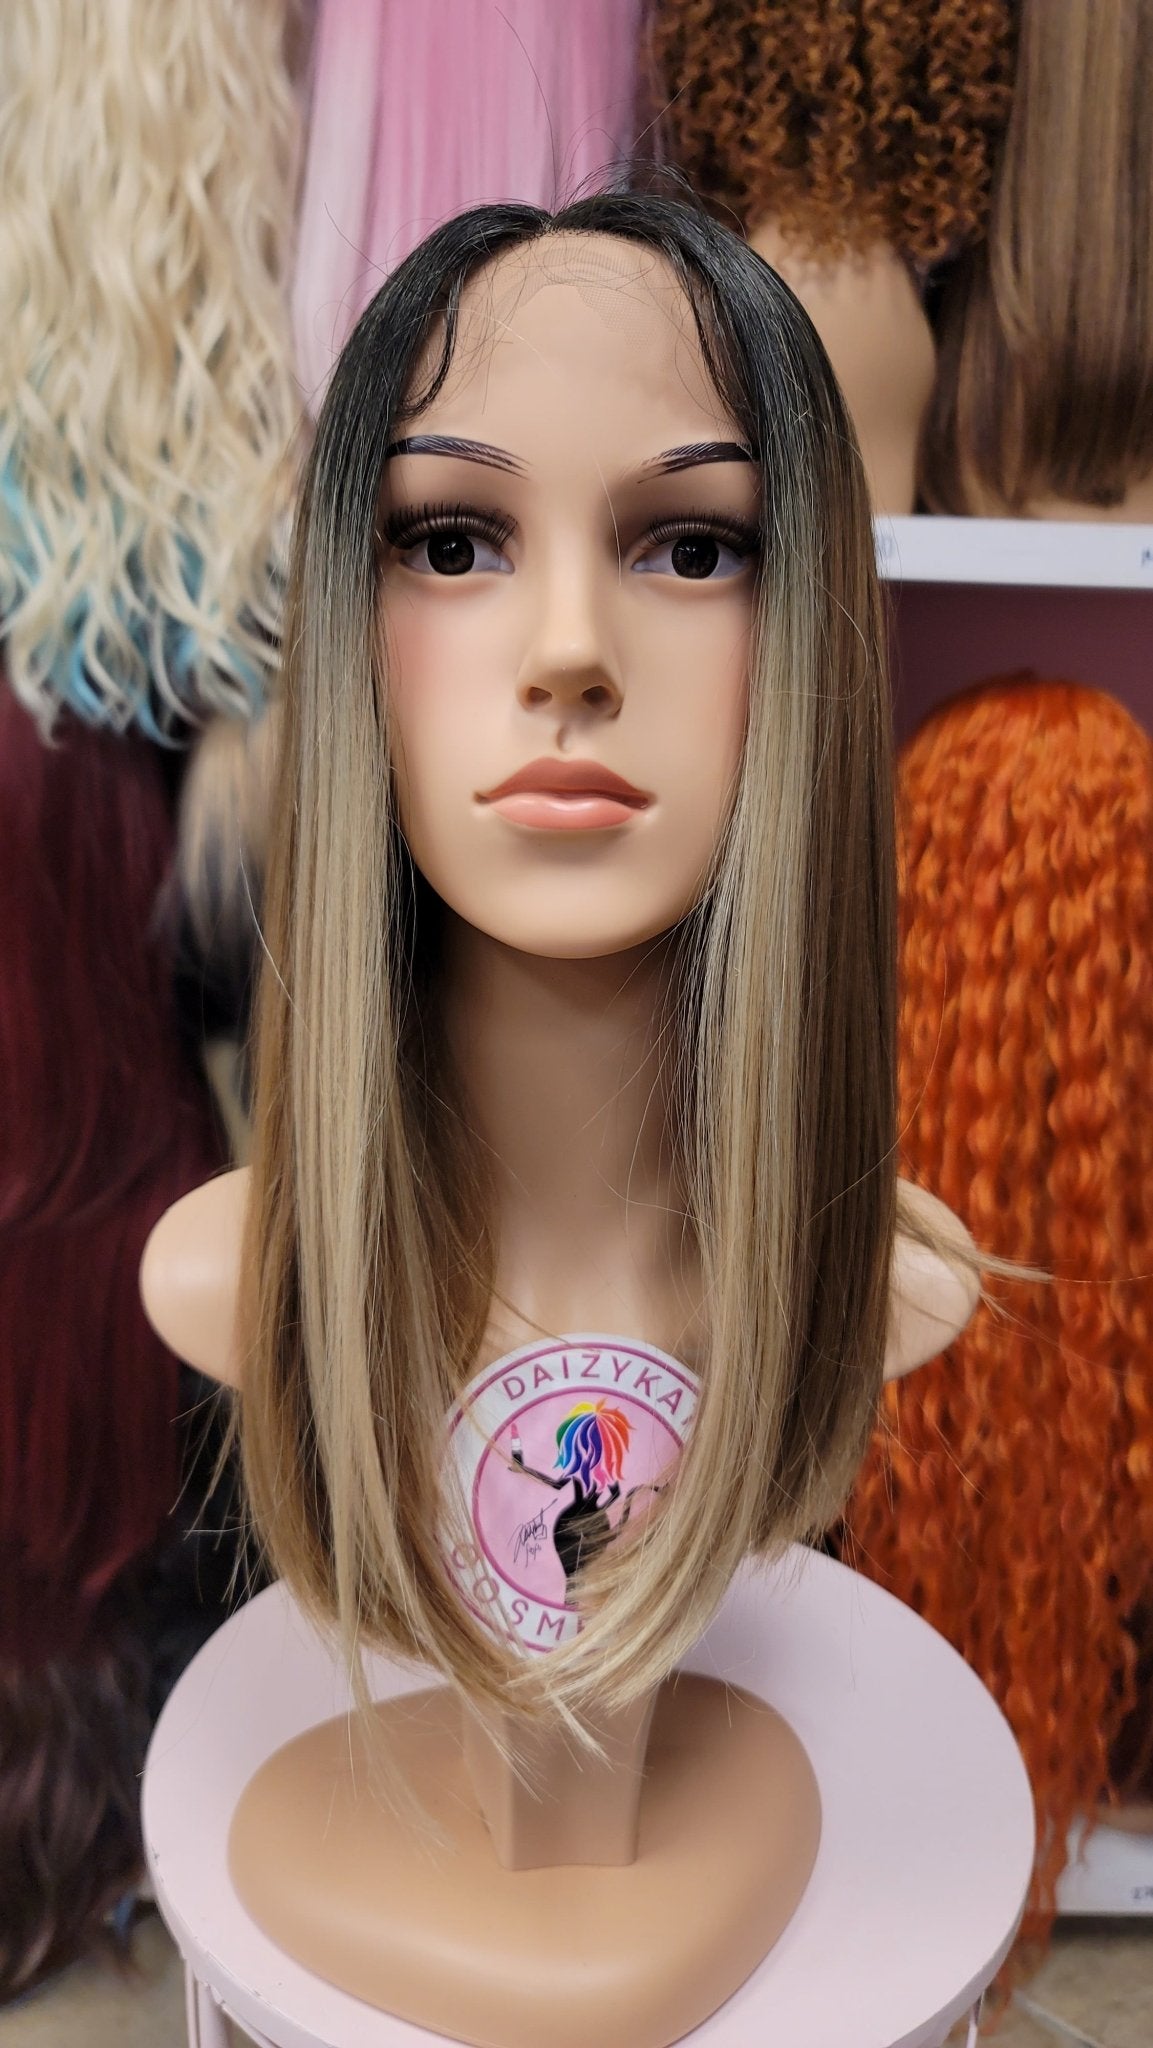 308 JACKIE - Middle Part Lace Front Wig - BLONDE/613 - DaizyKat Cosmetics 308 JACKIE - Middle Part Lace Front Wig - BLONDE/613 DaizyKat Cosmetics Wigs